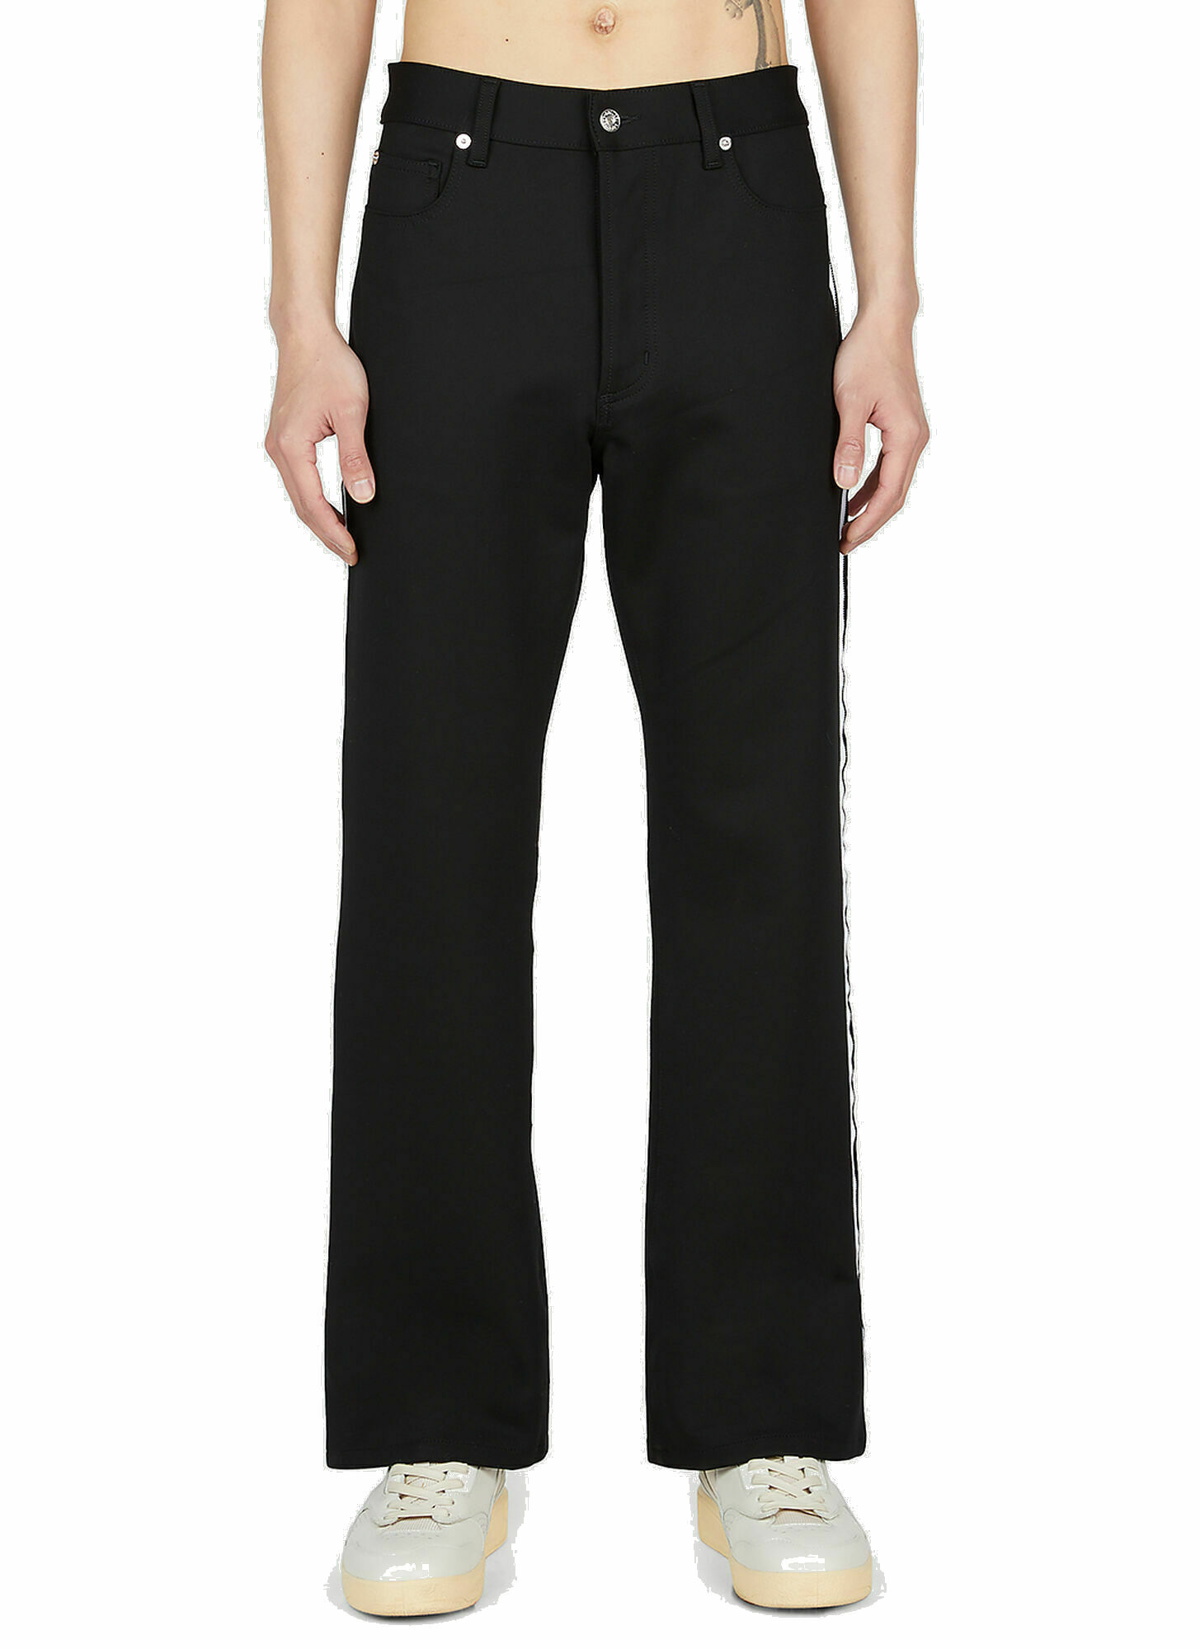 Gallery Dept. - Logan Poly Flare Jeans in Black Gallery Dept.